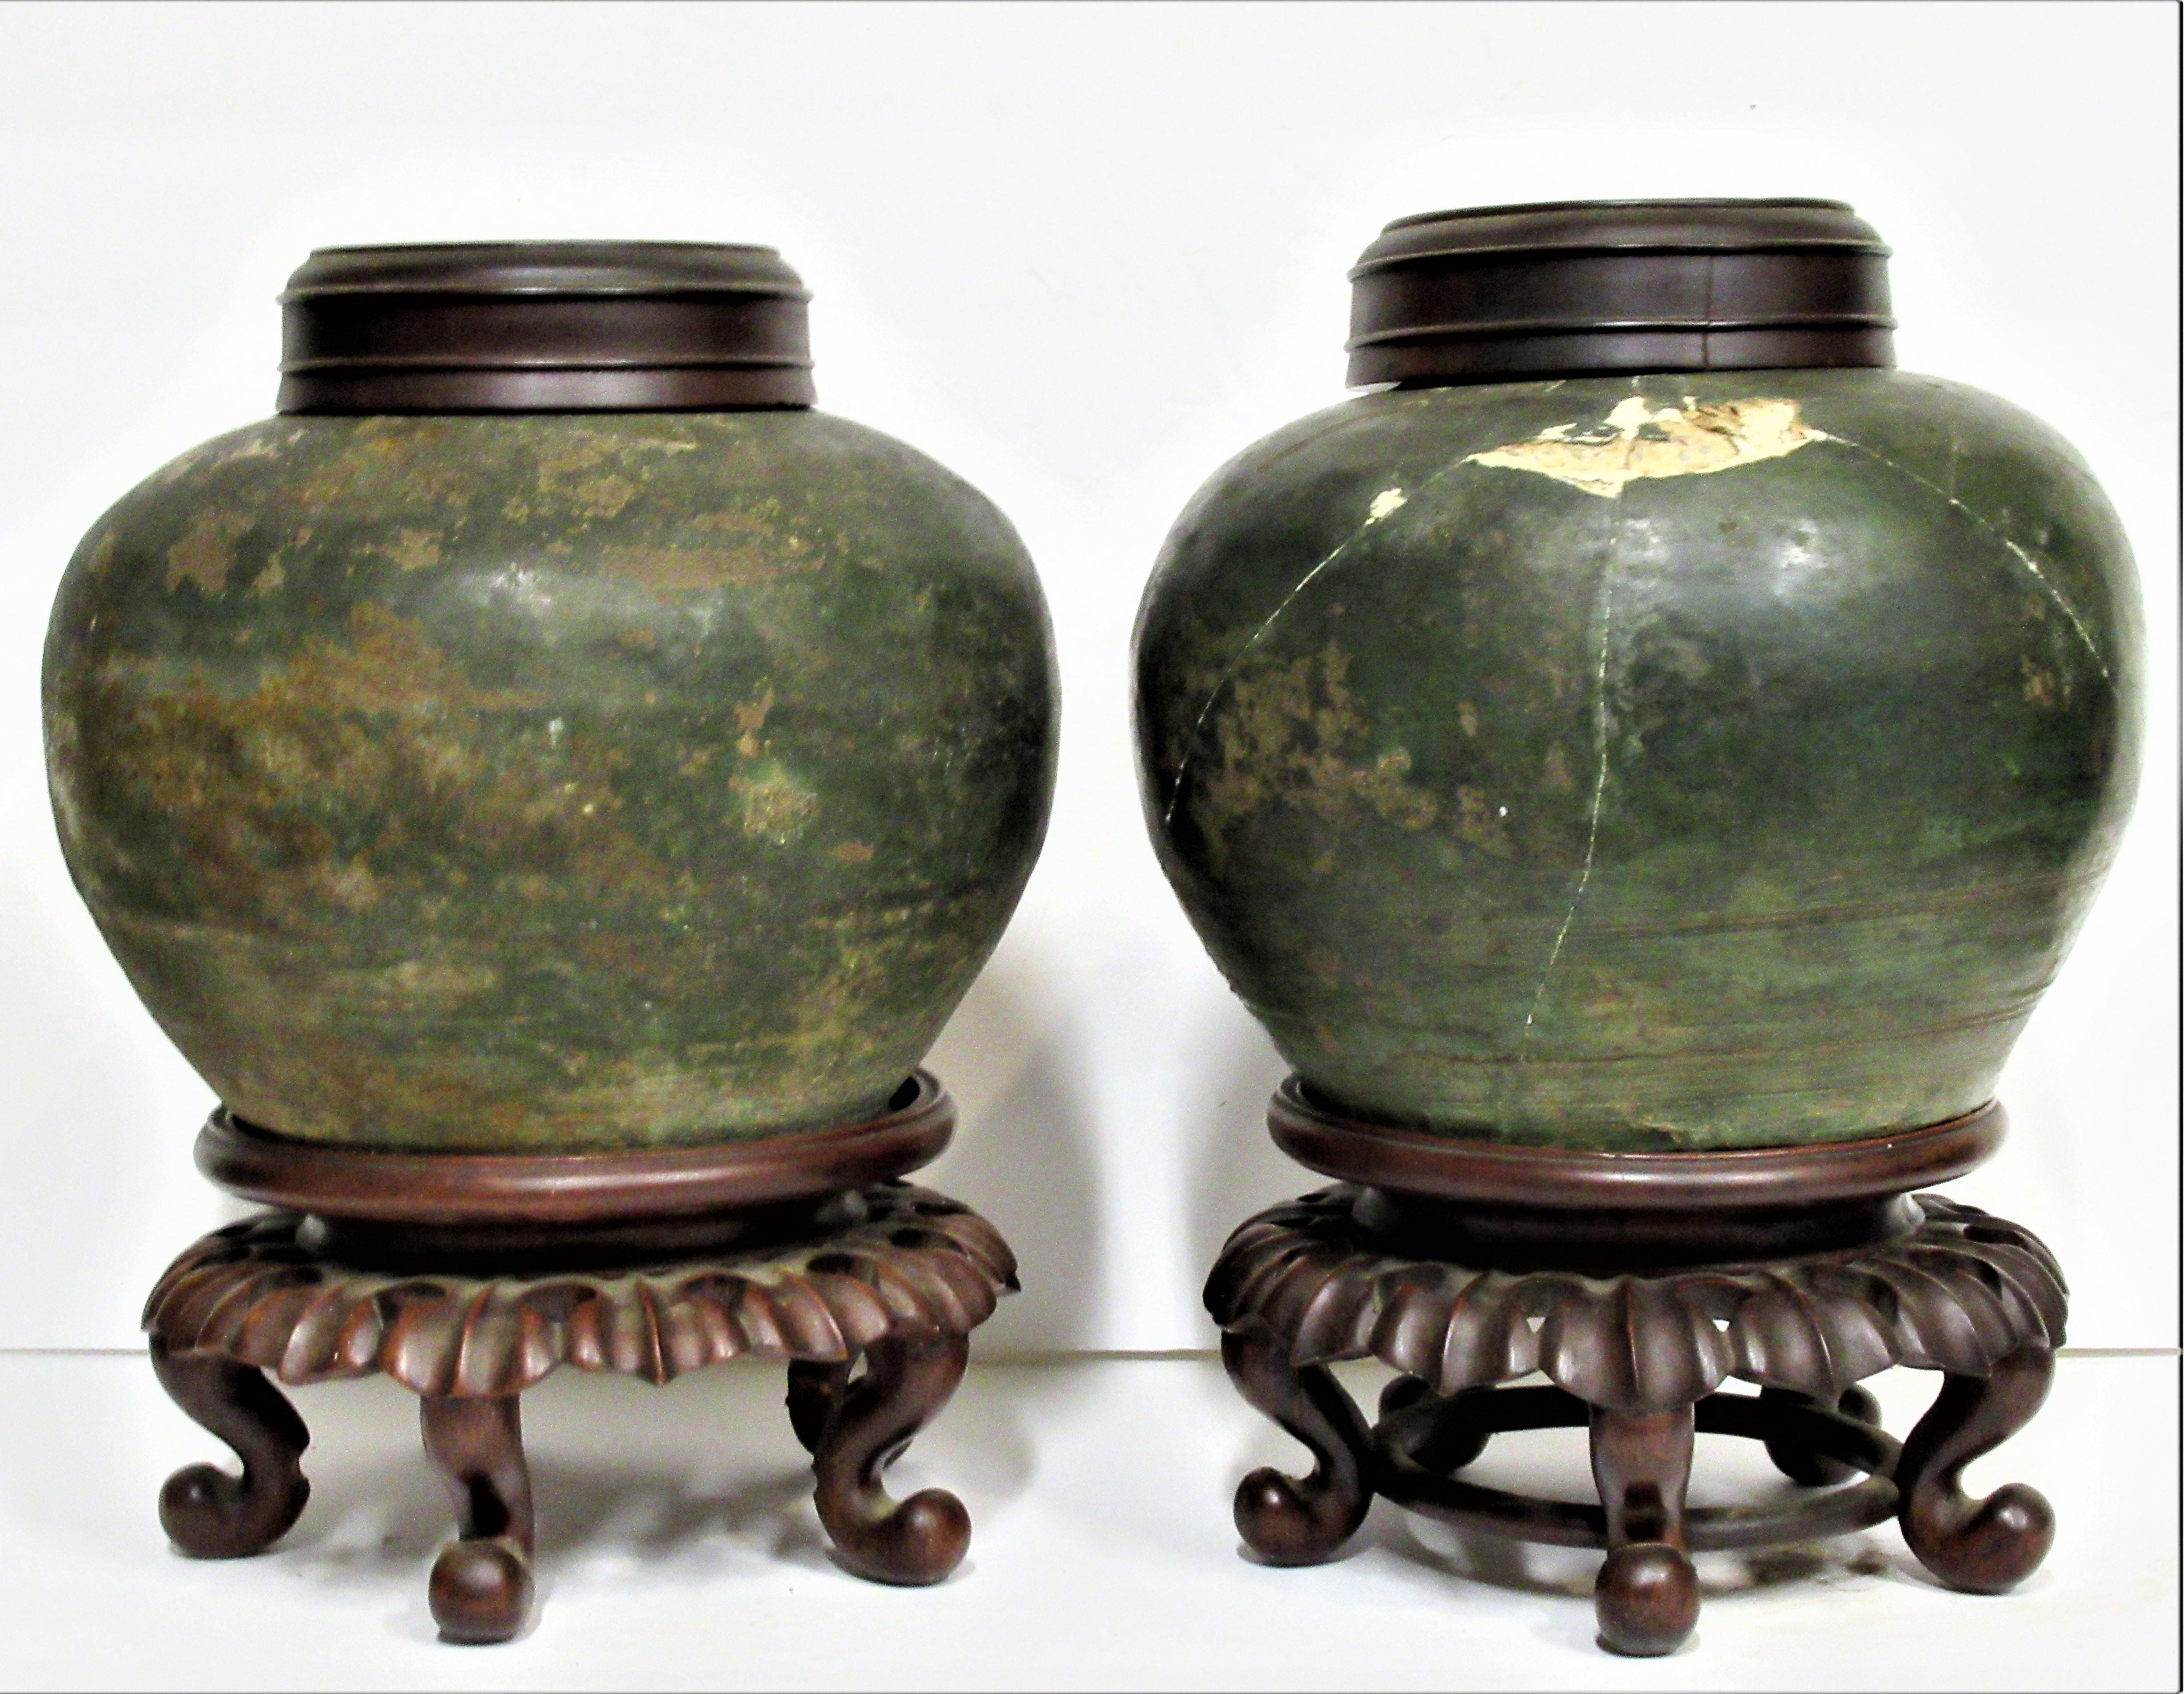 Pair of early Chinese ceramic tea jars with beautifully aged glazed surface color and archaic form. The carved wooden bases look to be 19th century. We think the jars are considerably older, and could date anywhere from 15th century - 18th century.